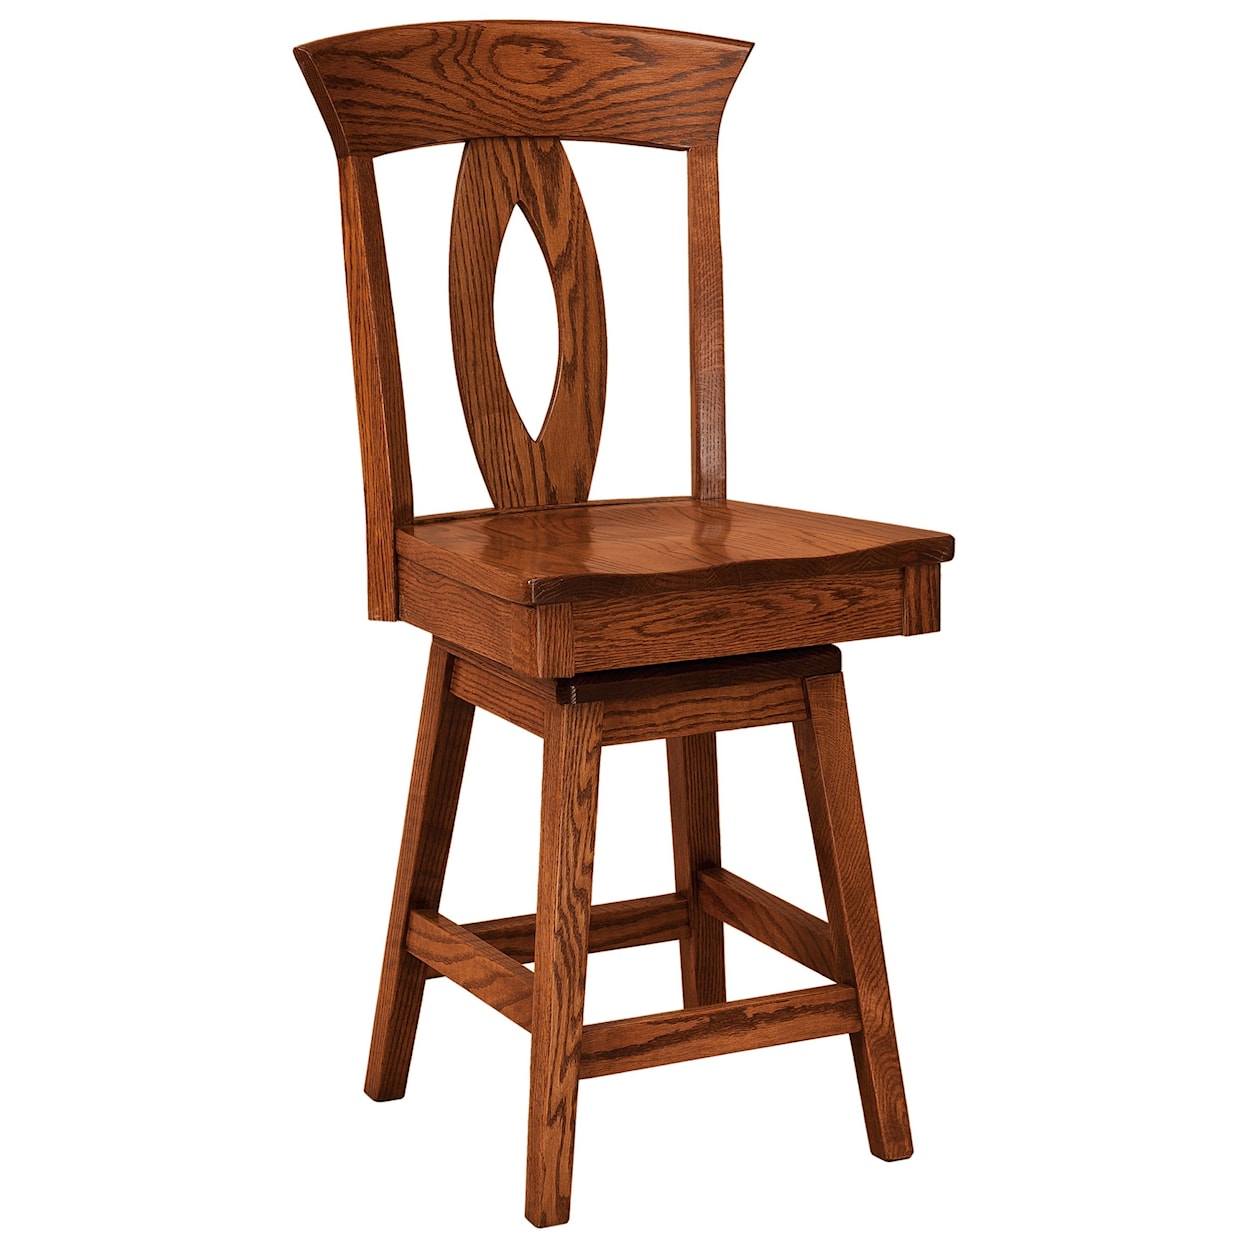 F&N Woodworking Brookfield Swivel Counter Height Stool - Fabric Seat